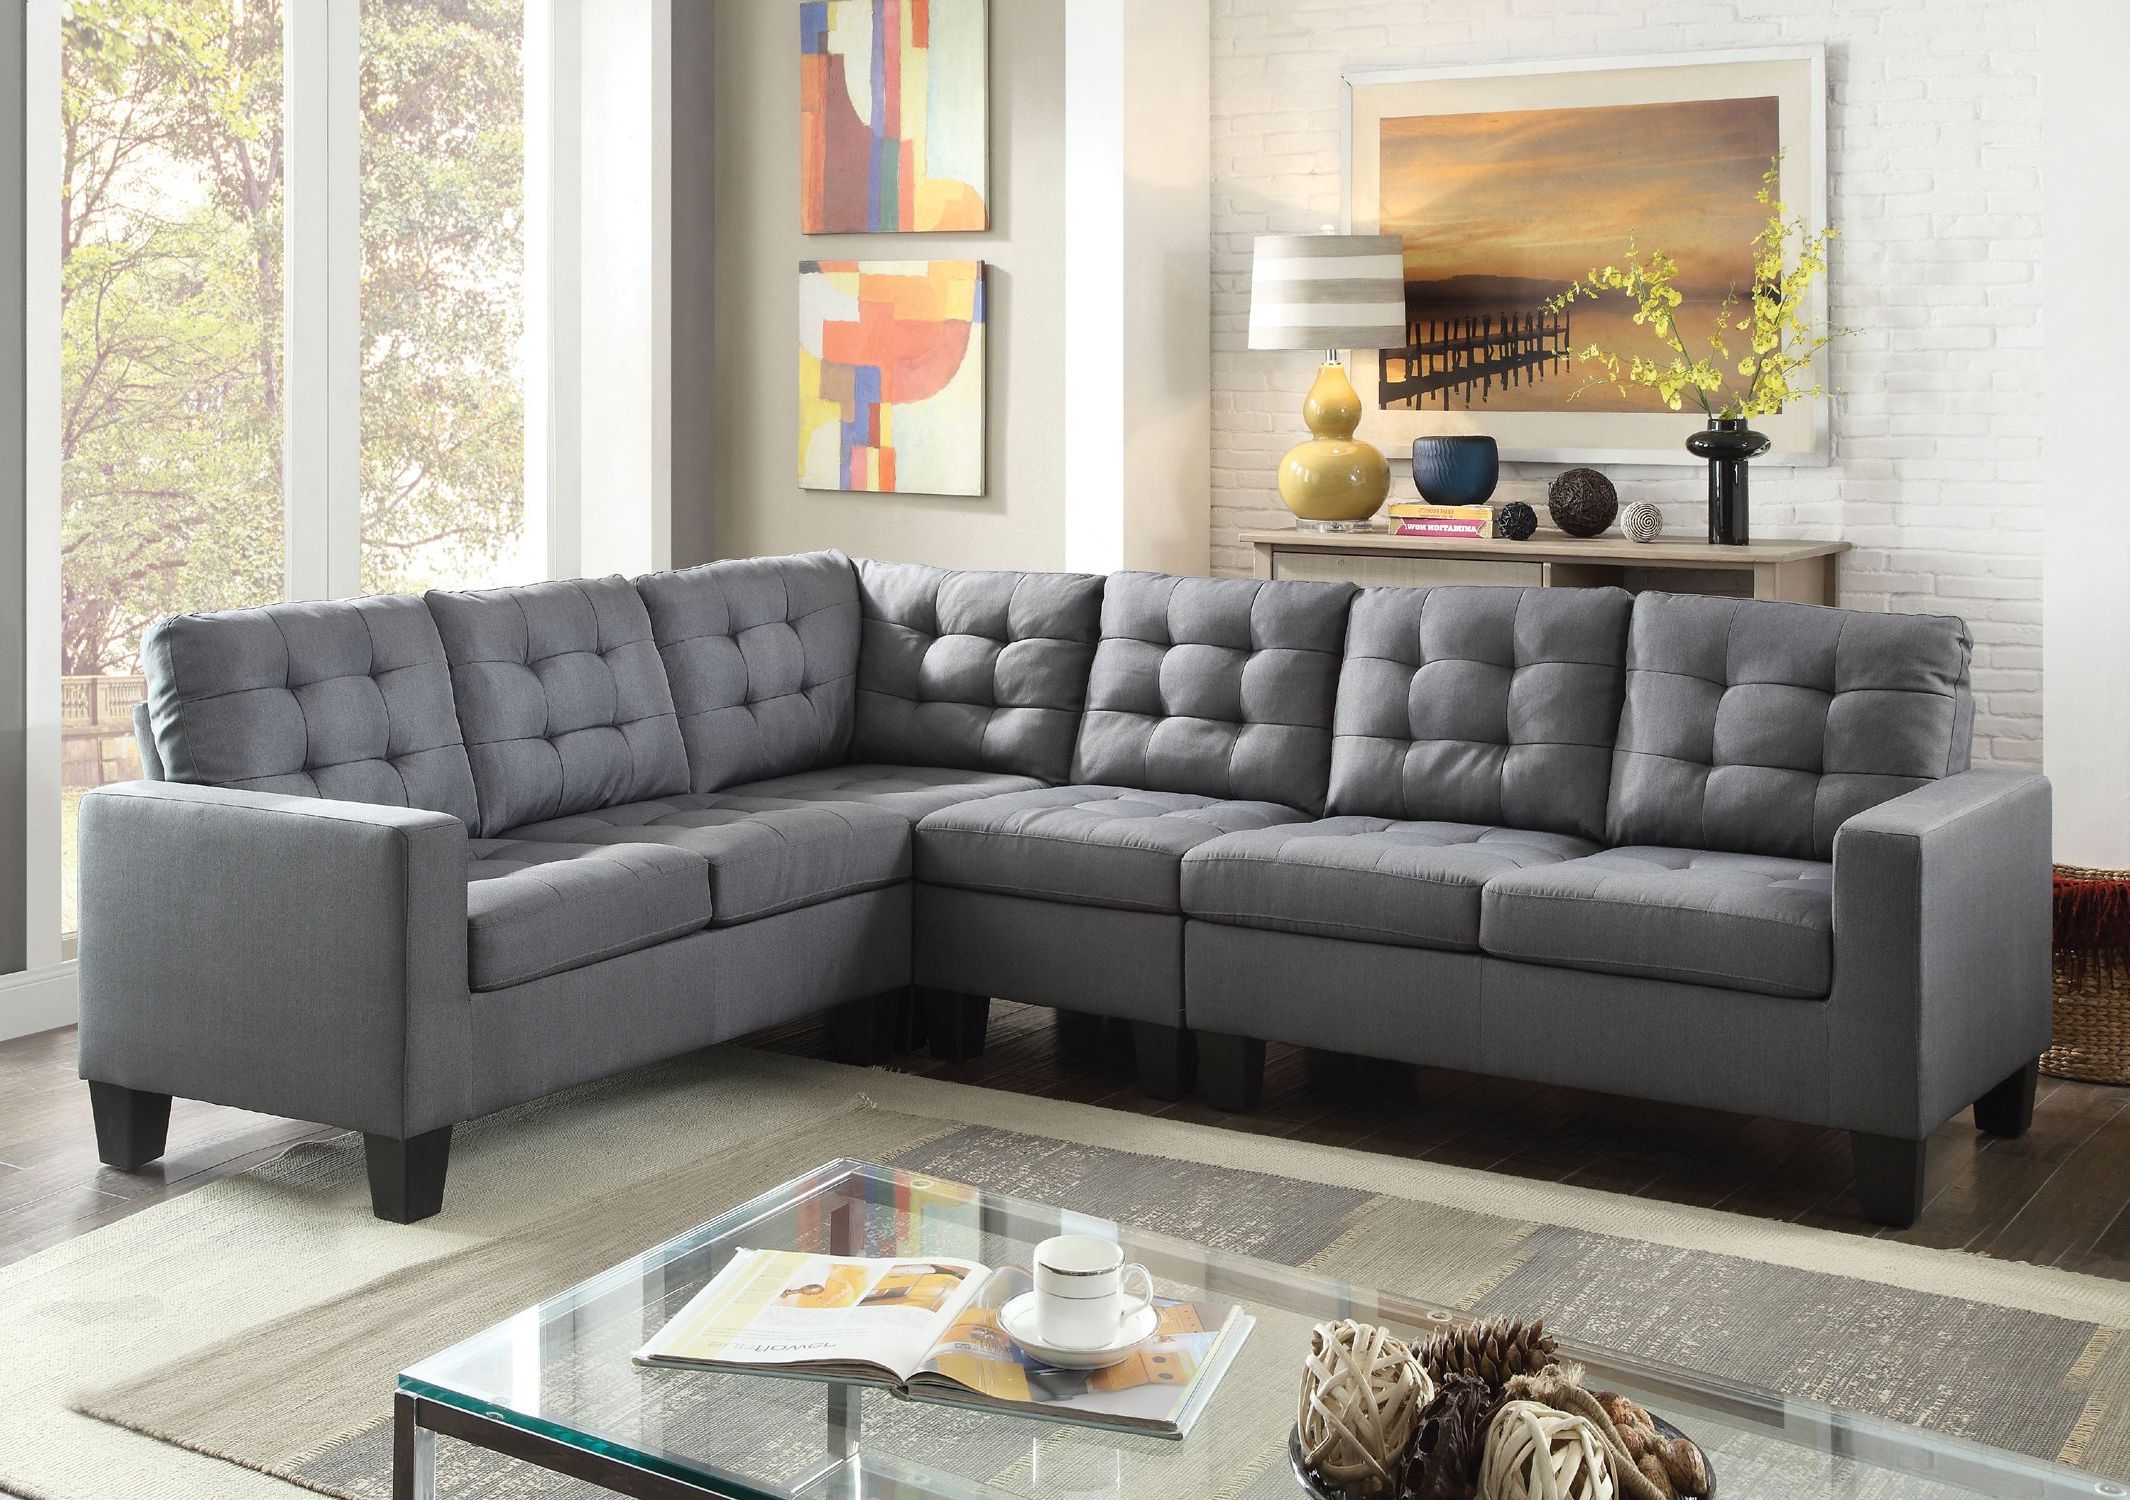 52760 Earsom Gray Linen Sectional Sofa Set – Luchy Amor Furniture In Recent Gray Linen Sofas (View 2 of 15)